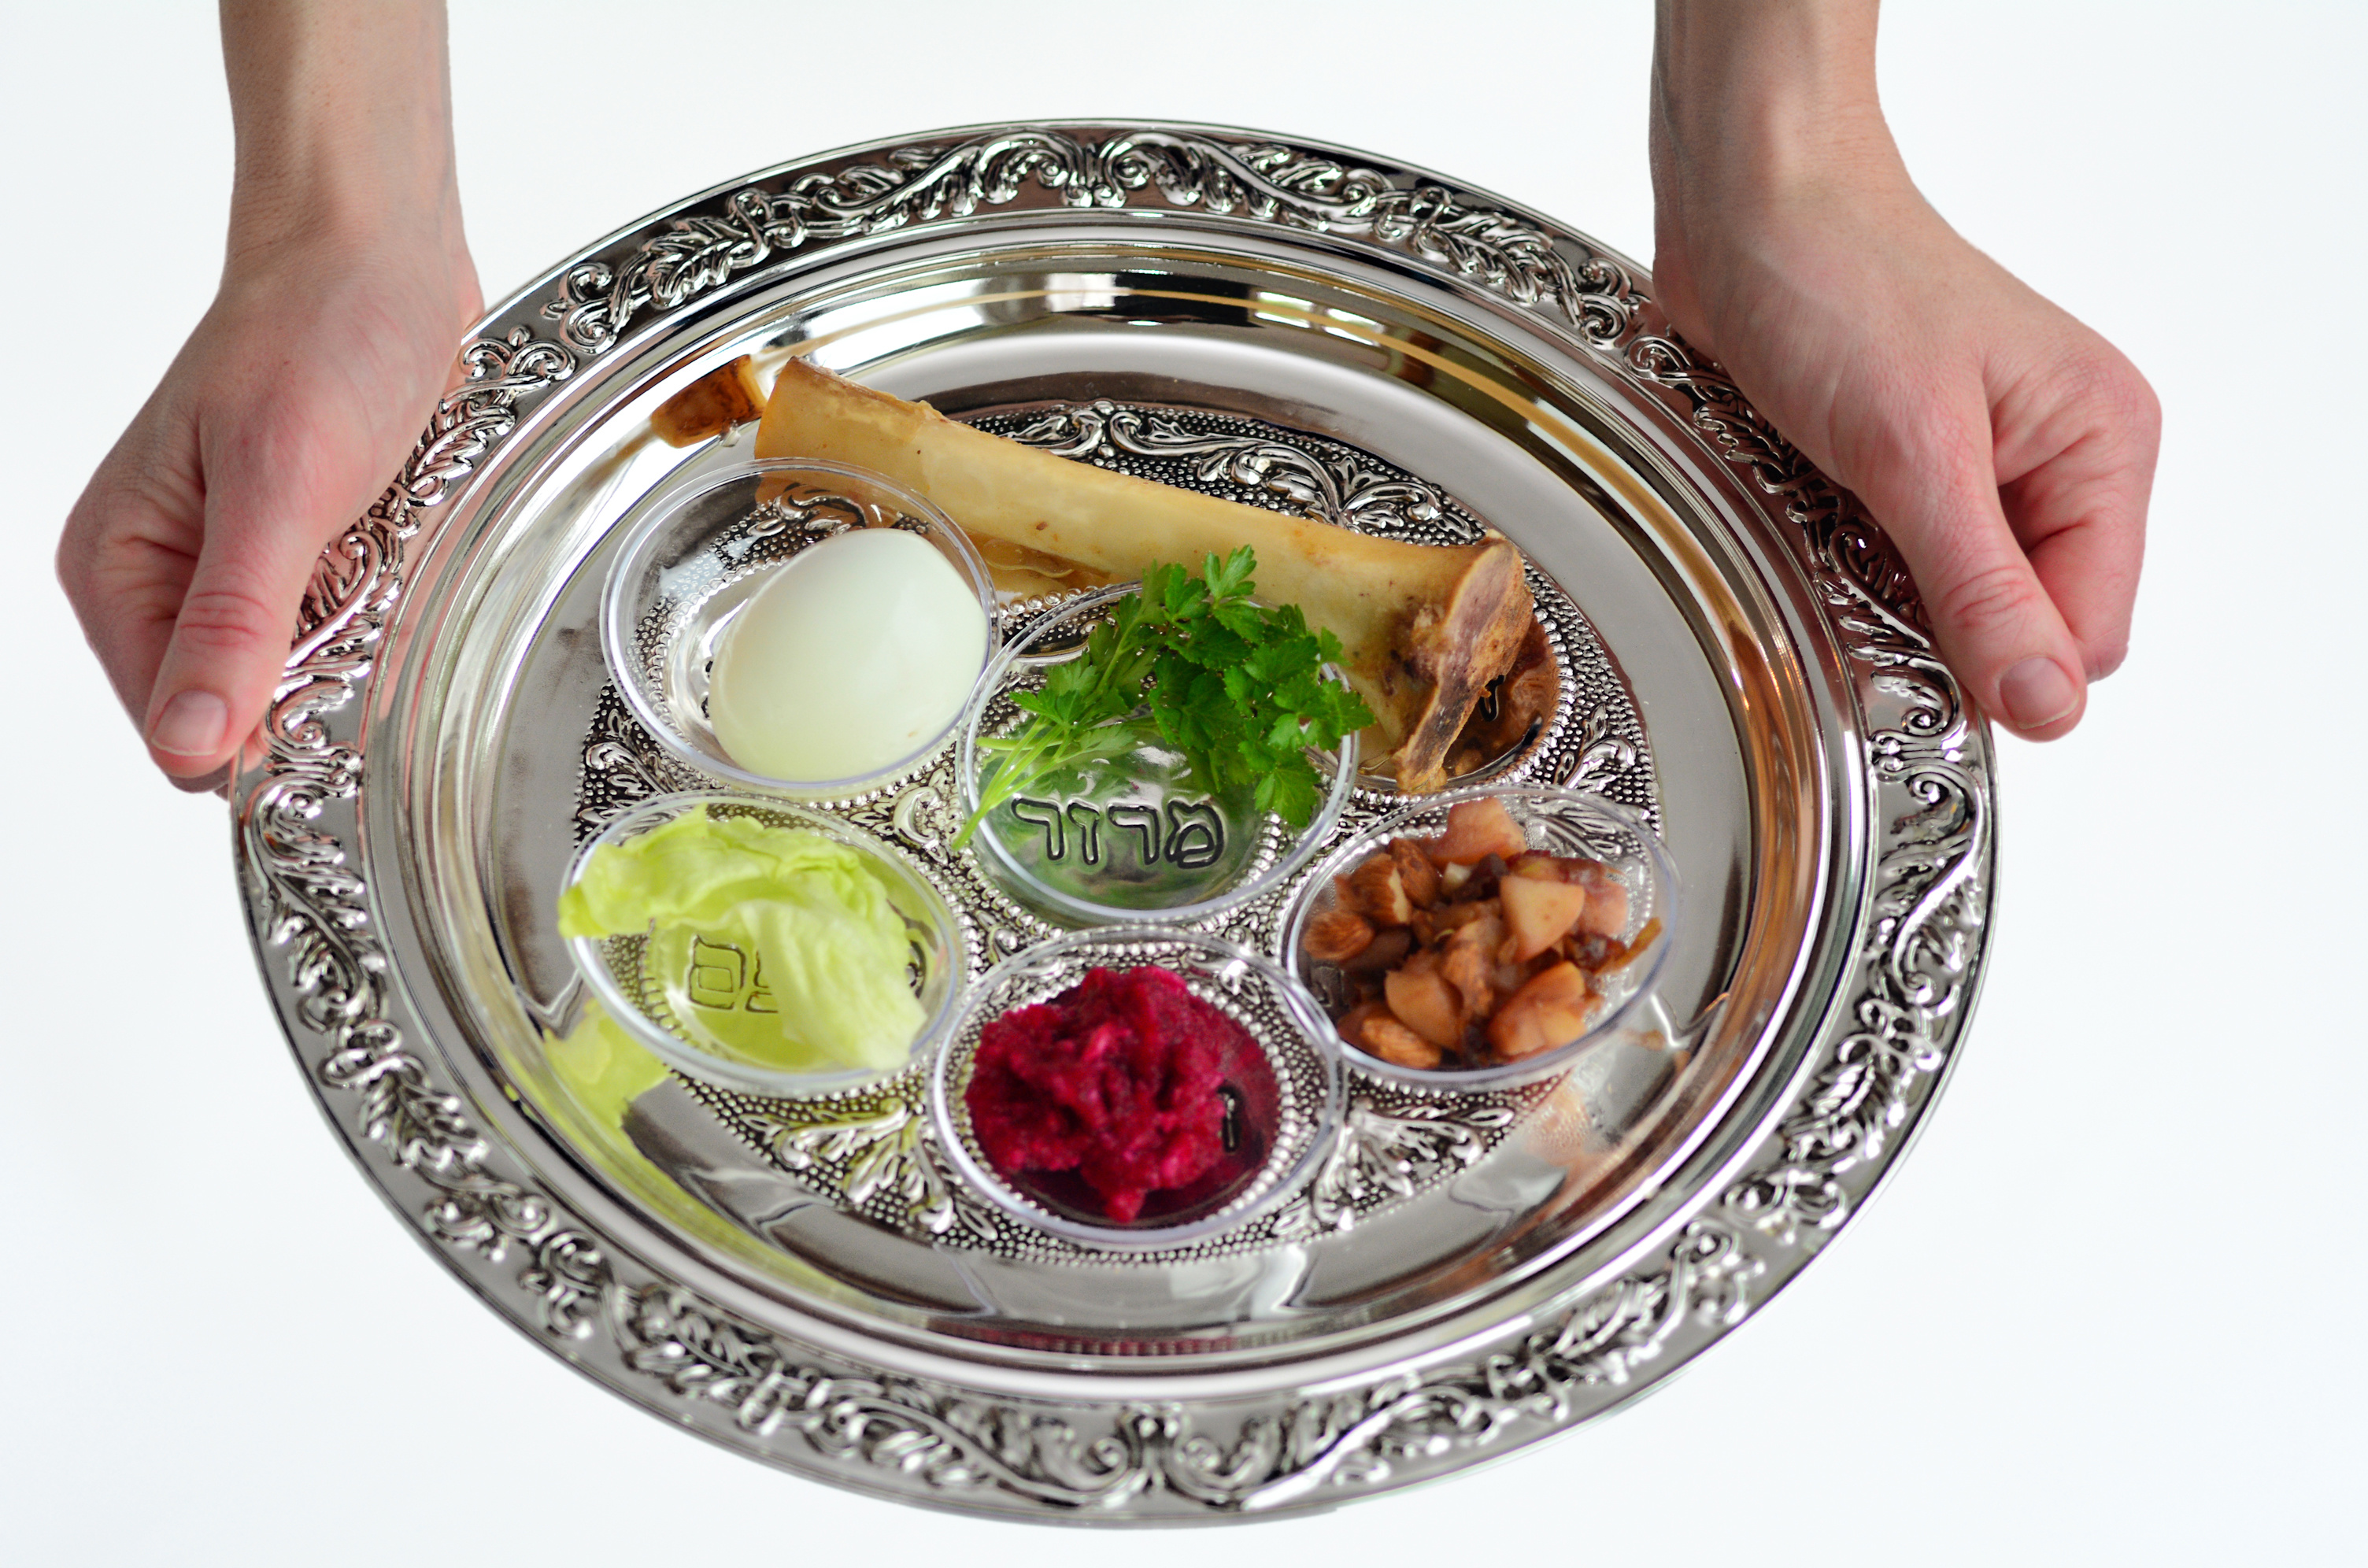 Passover Seder Plate The Passover Seder Plate More Than Just A Judaic.